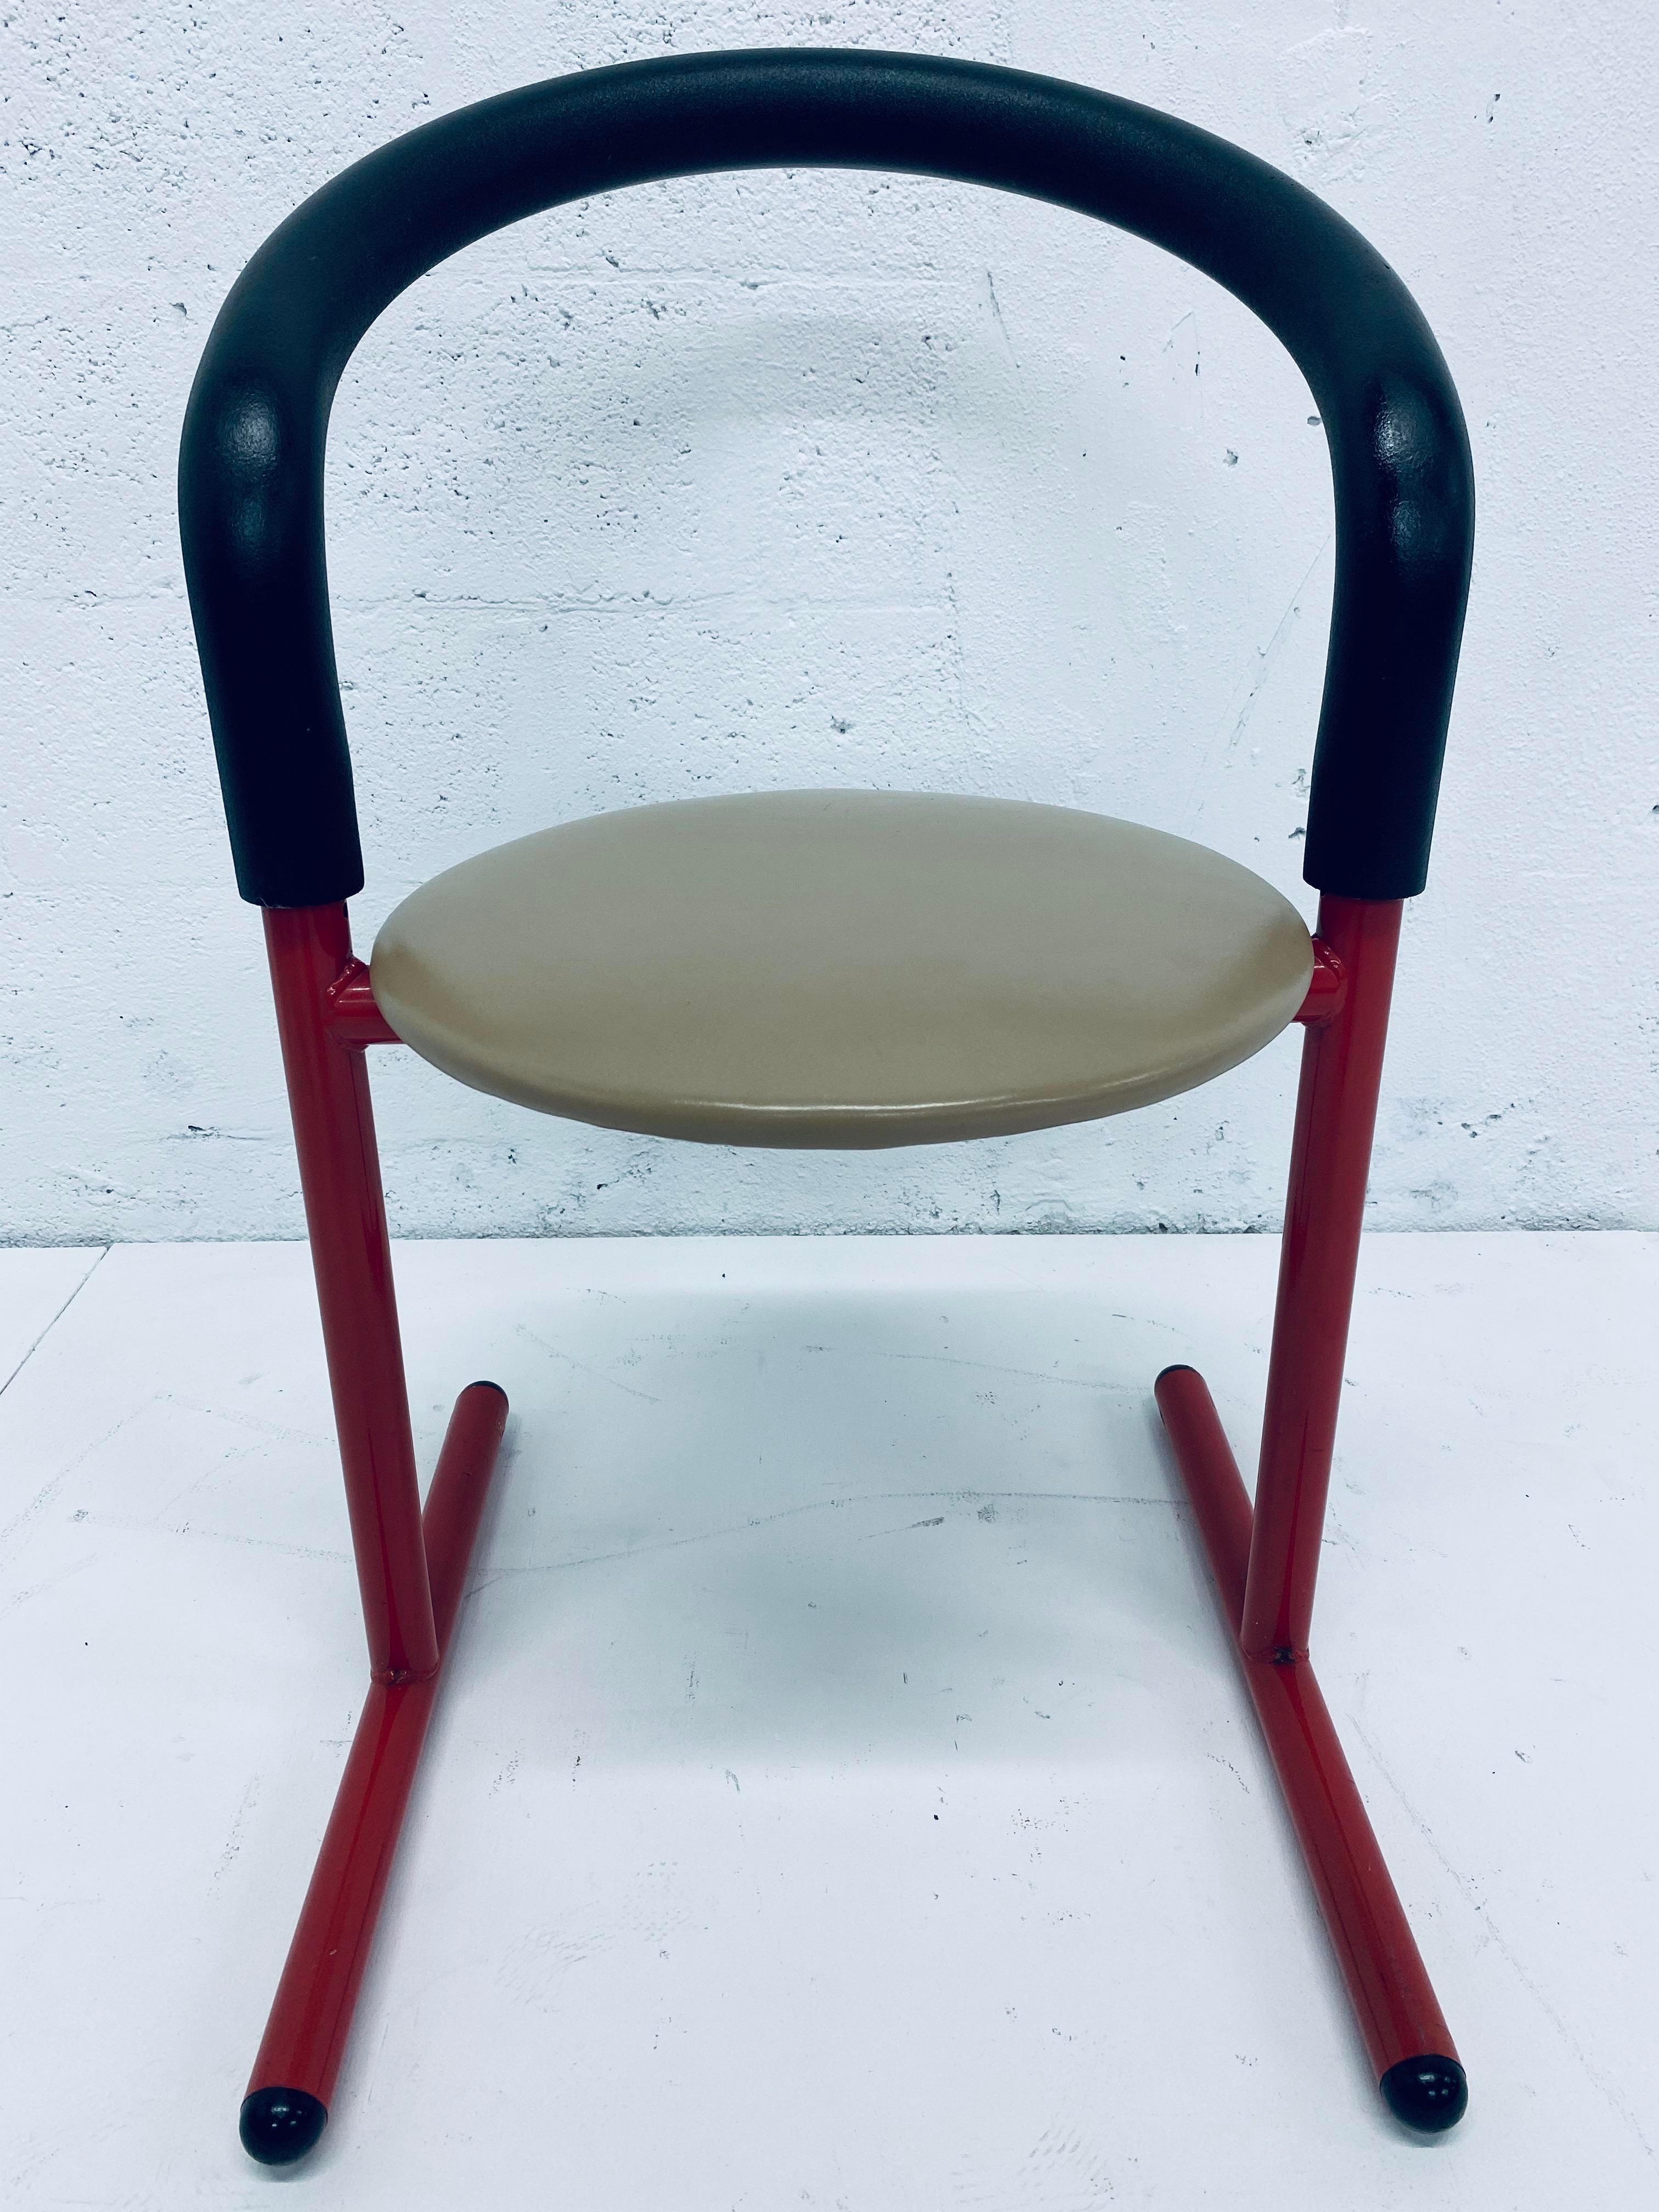 Tubular steel frame in red lacquer with black foam back support and beige seat cushion by Amisco, Canada.